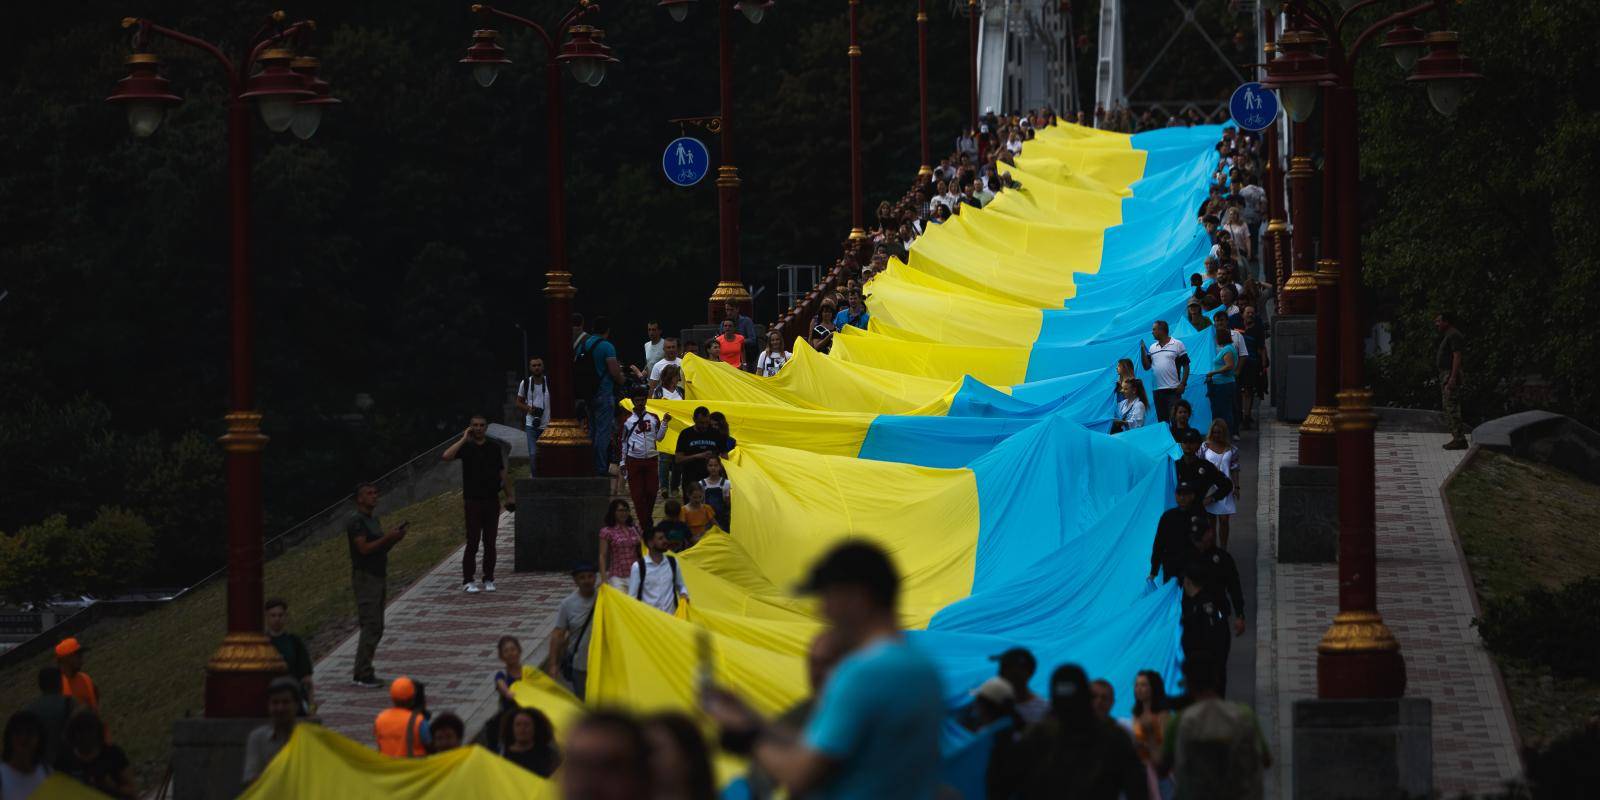 The Rise and Role of Ukrainian Ethnic Nationalism